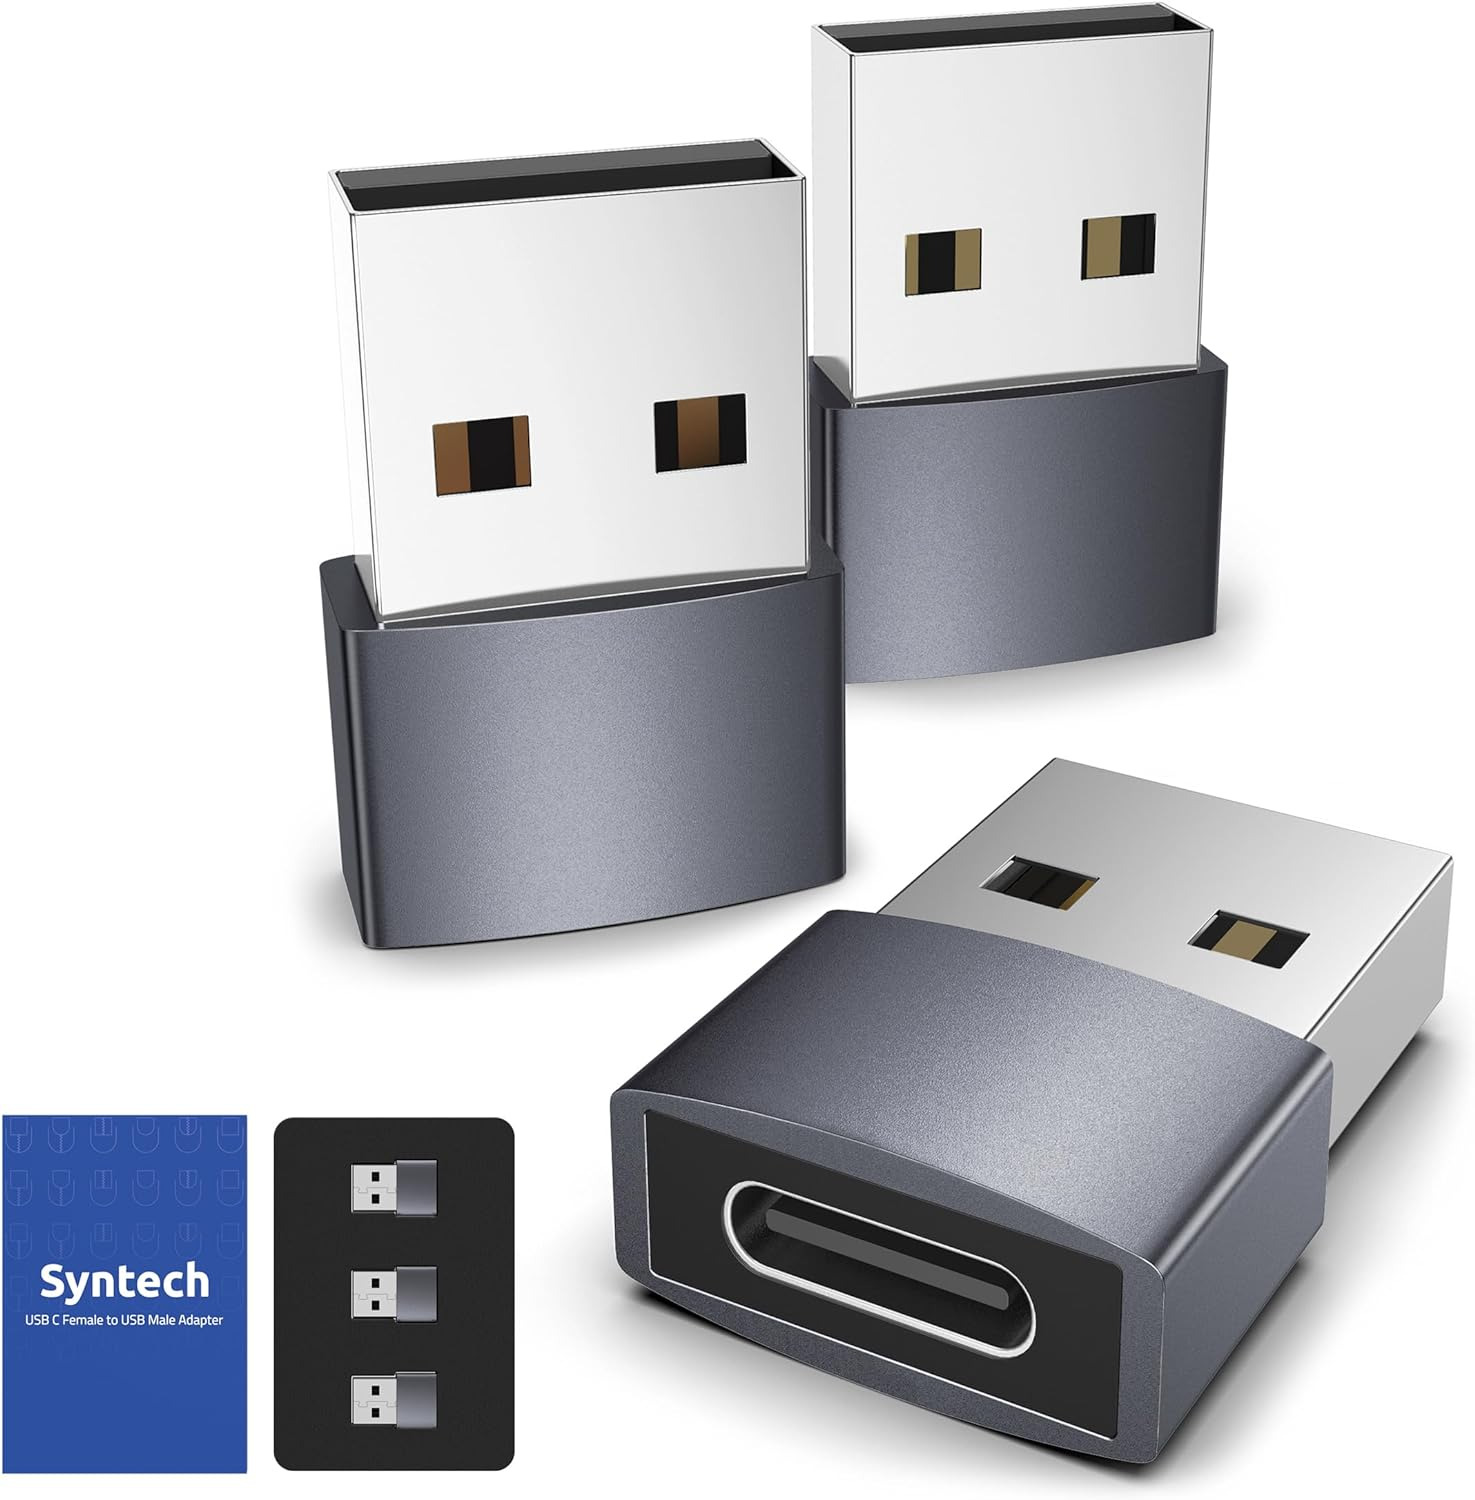 Syntech USB C Female to USB Male Adapter Pack of 3 Type C to USB a Converter 